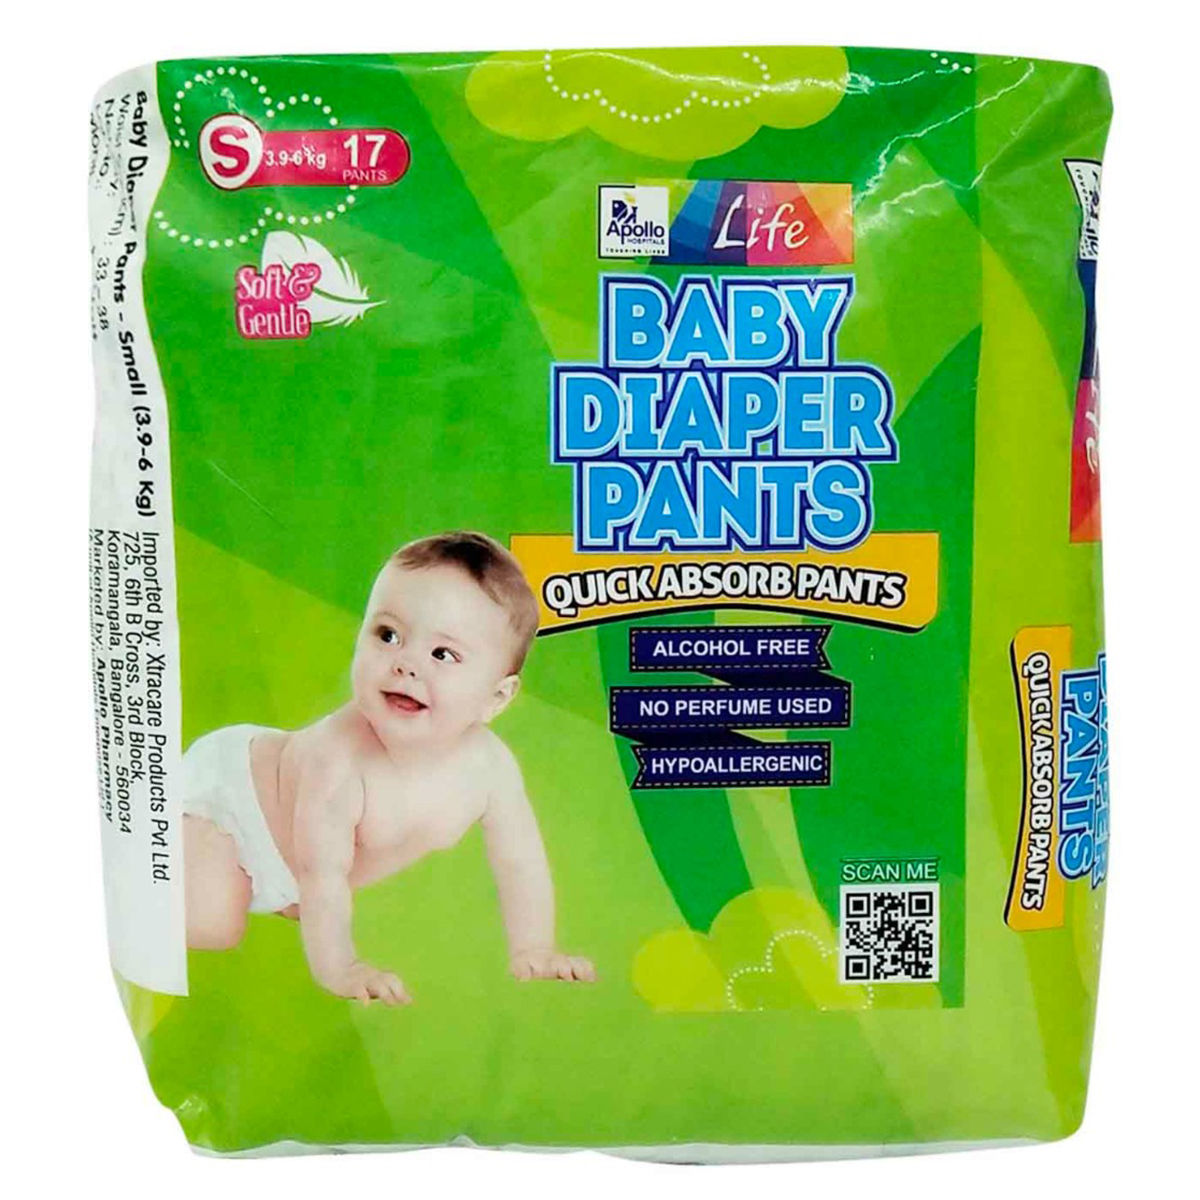 Buy Huggies Wonder Pants at Best Price, Online Baby and Kids Shopping Store  - FirstCry.com